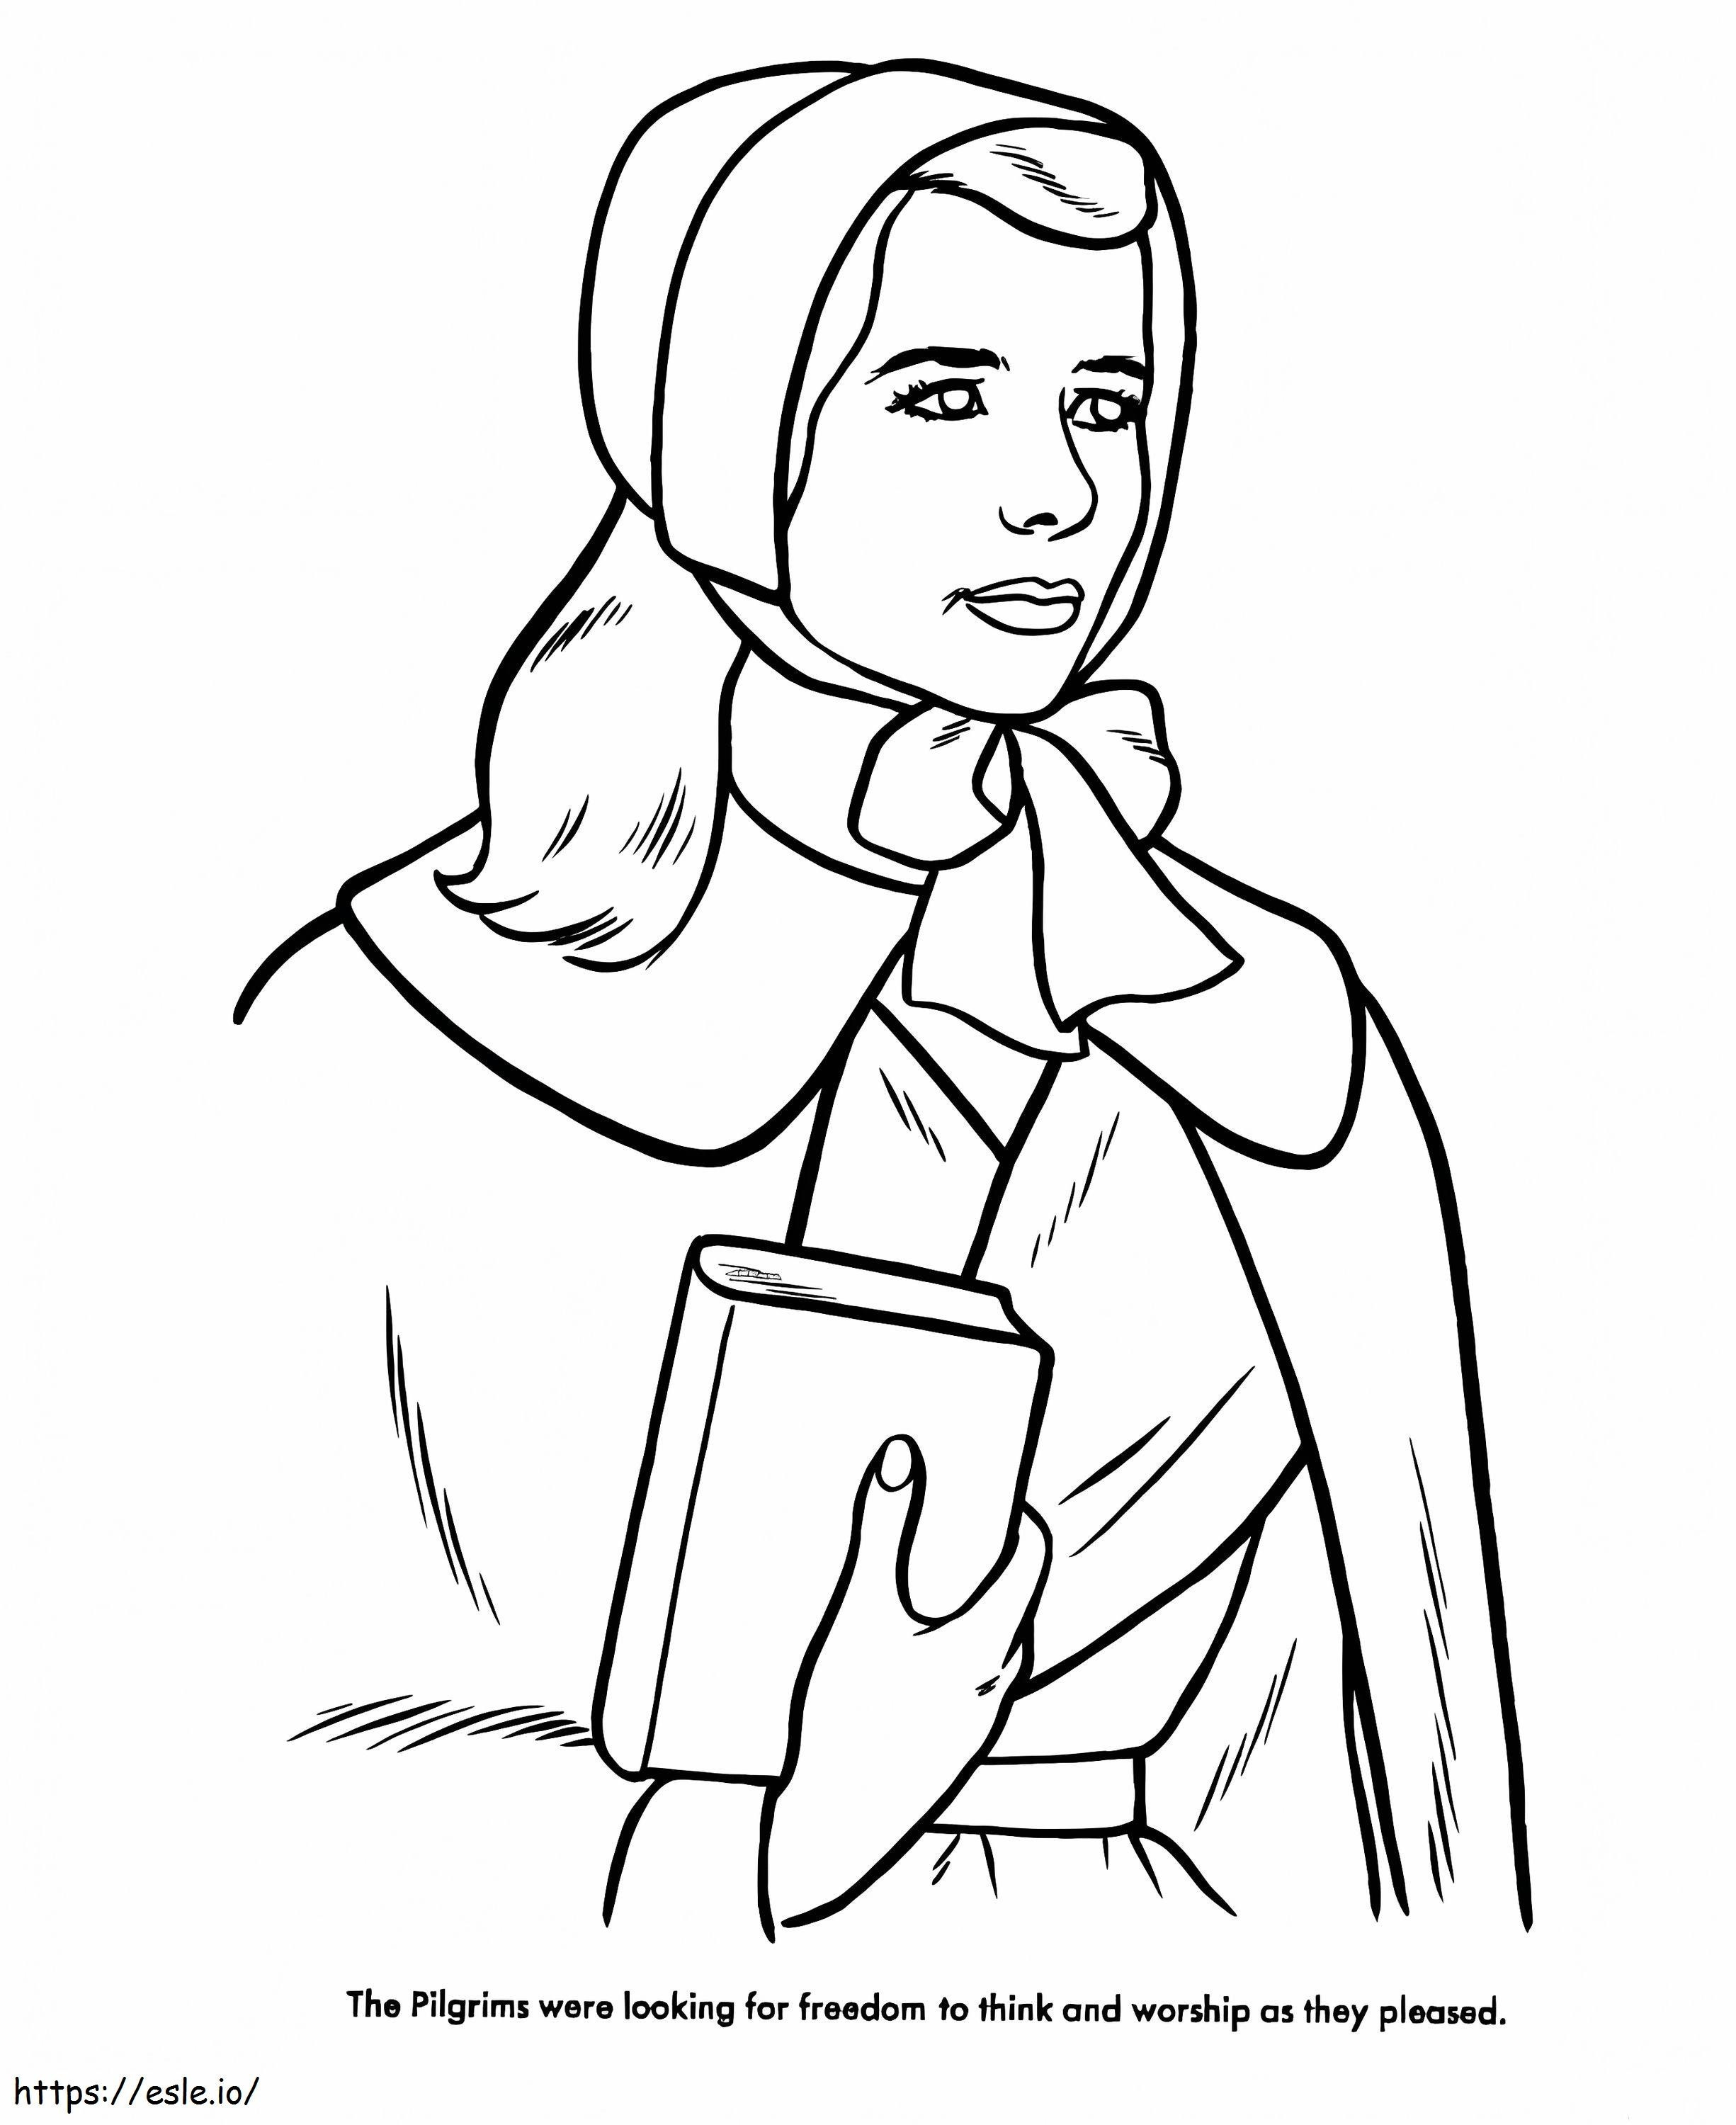 The Pilgrim coloring page